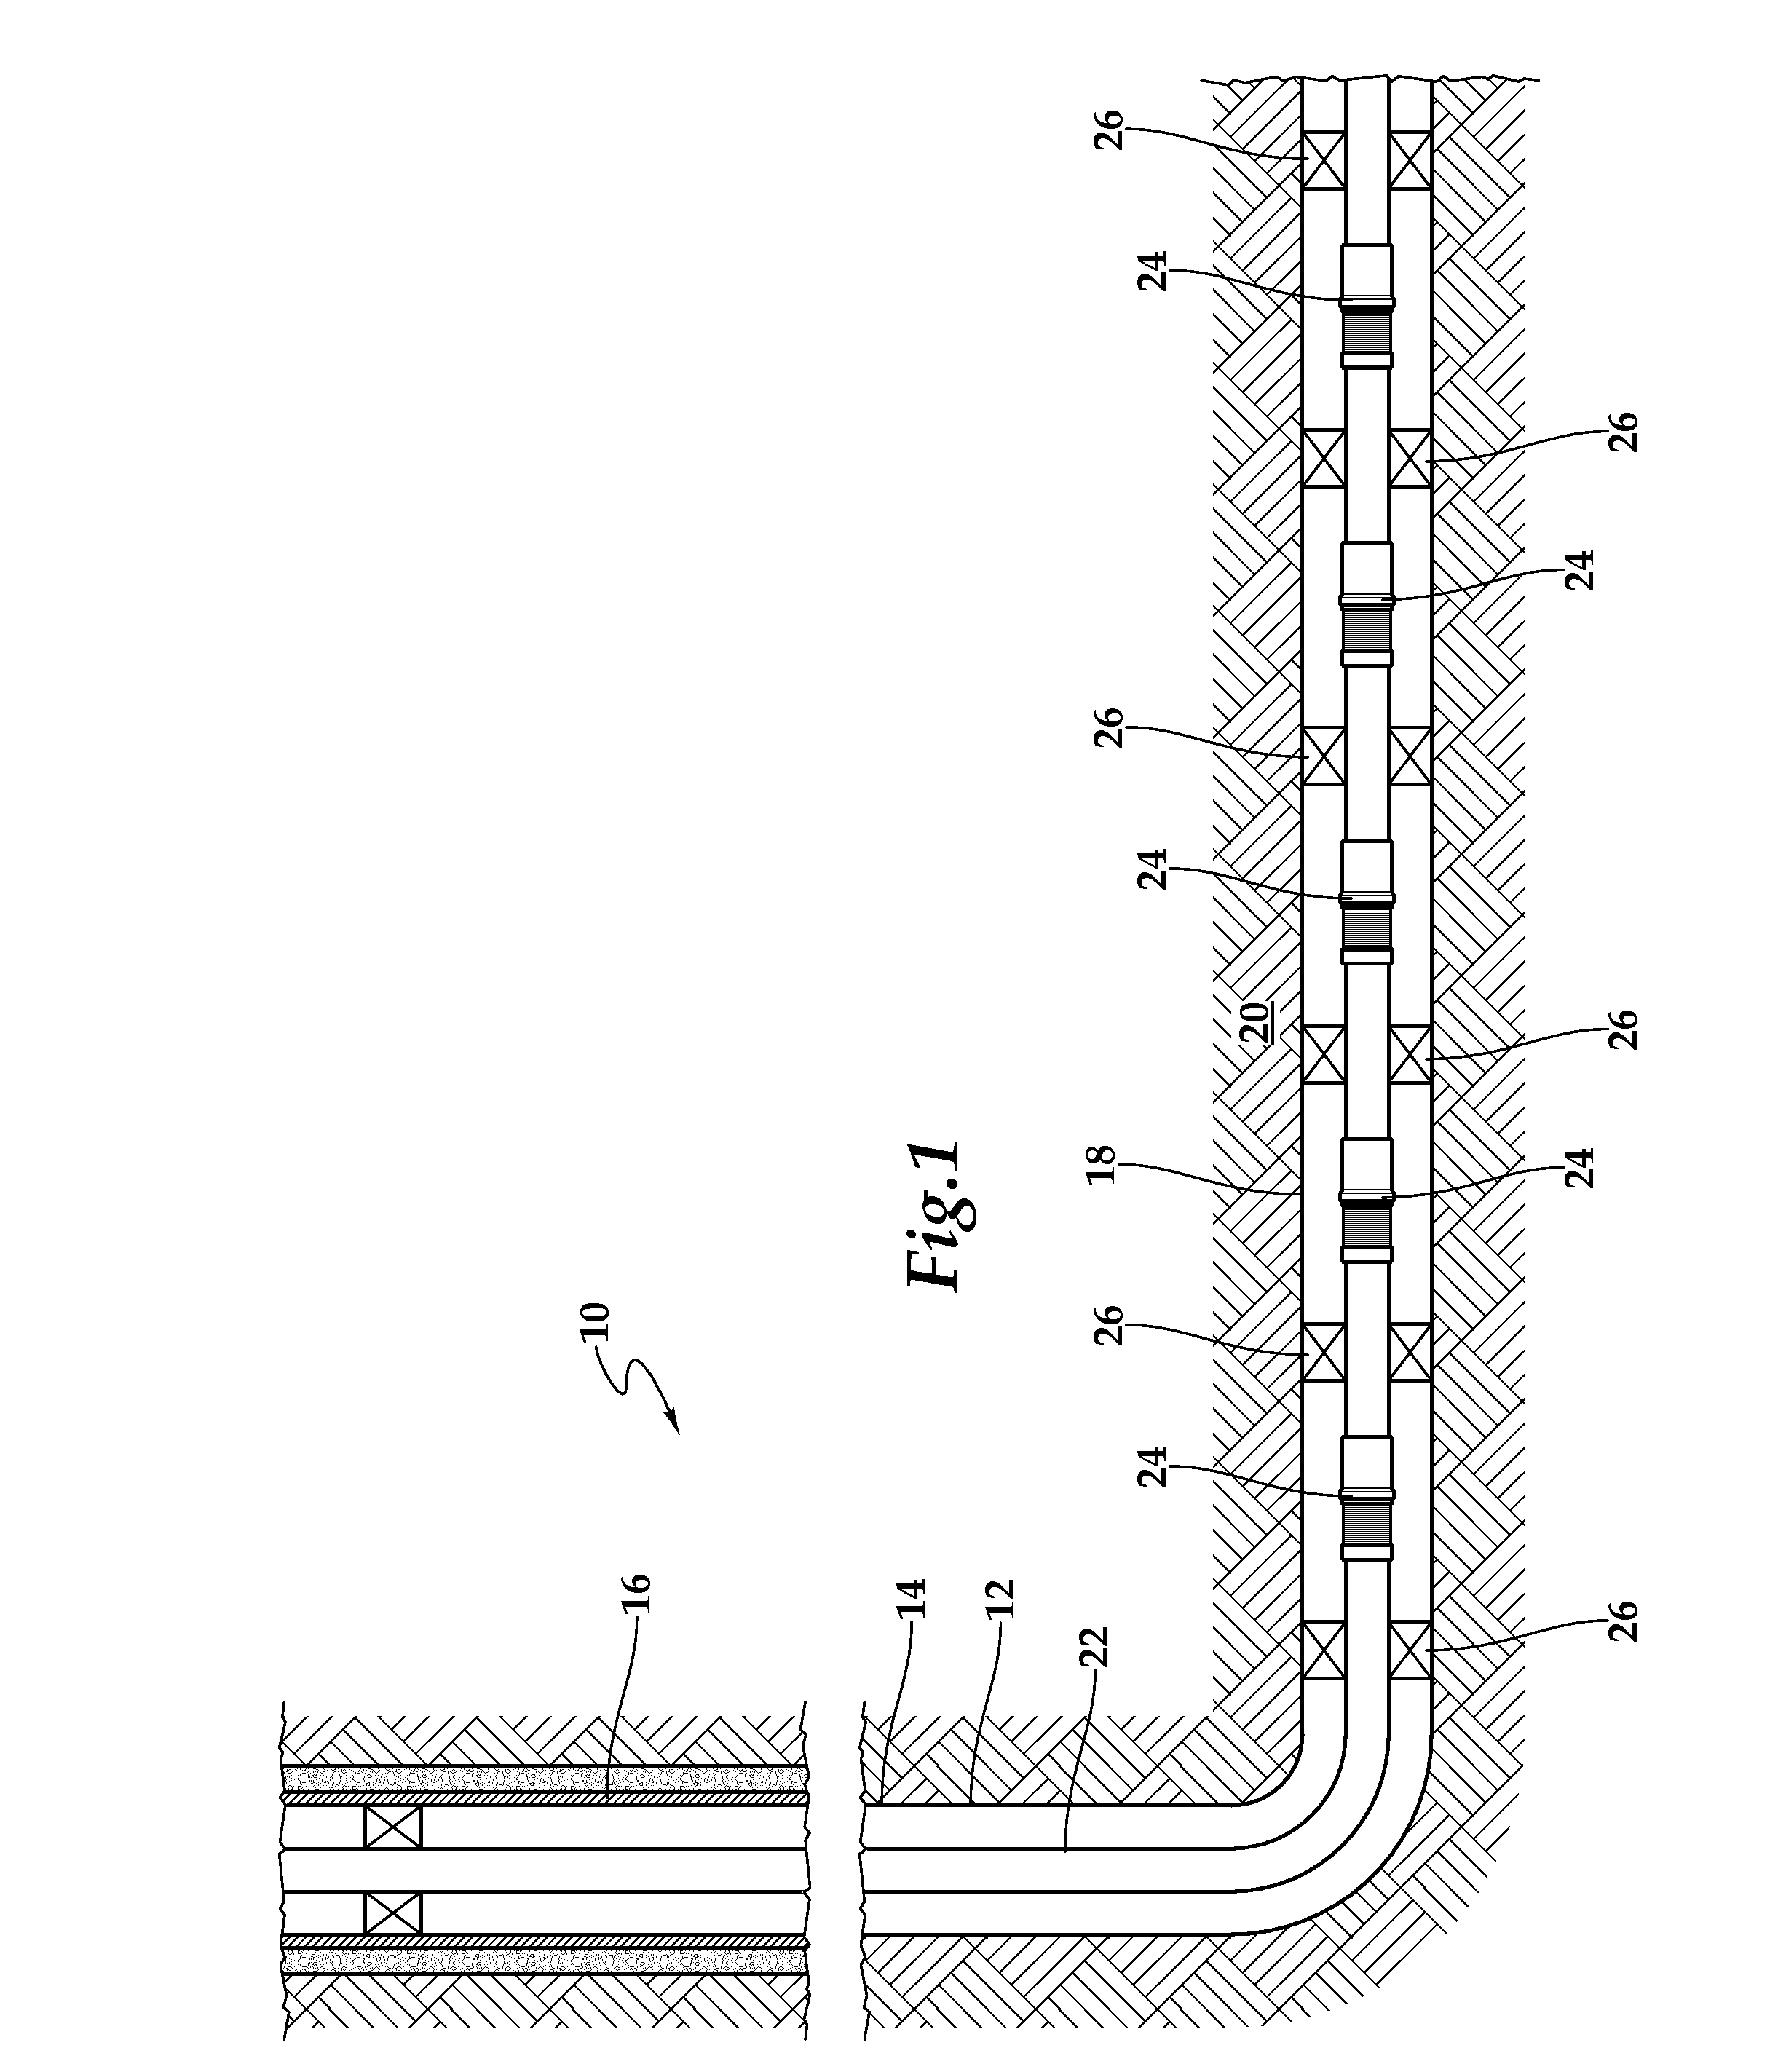 Control Screen Assembly Having Integral Connector Rings and Method for Making Same